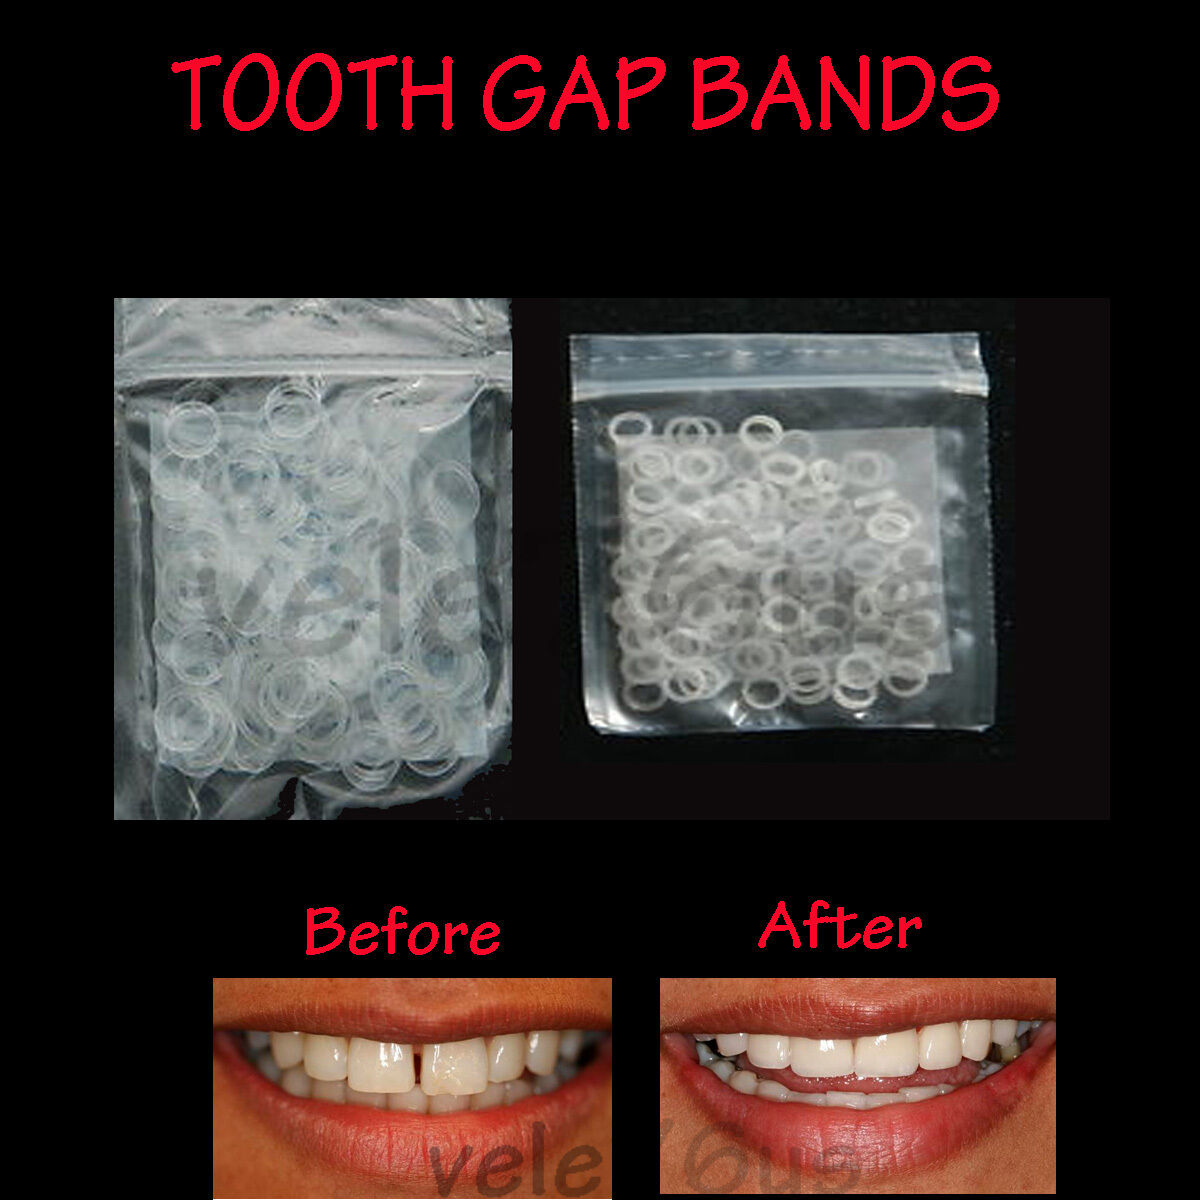 Tooth Gap Bands -- 3.5 Oz Orthodontic Bands -3/16" - Instructions Included